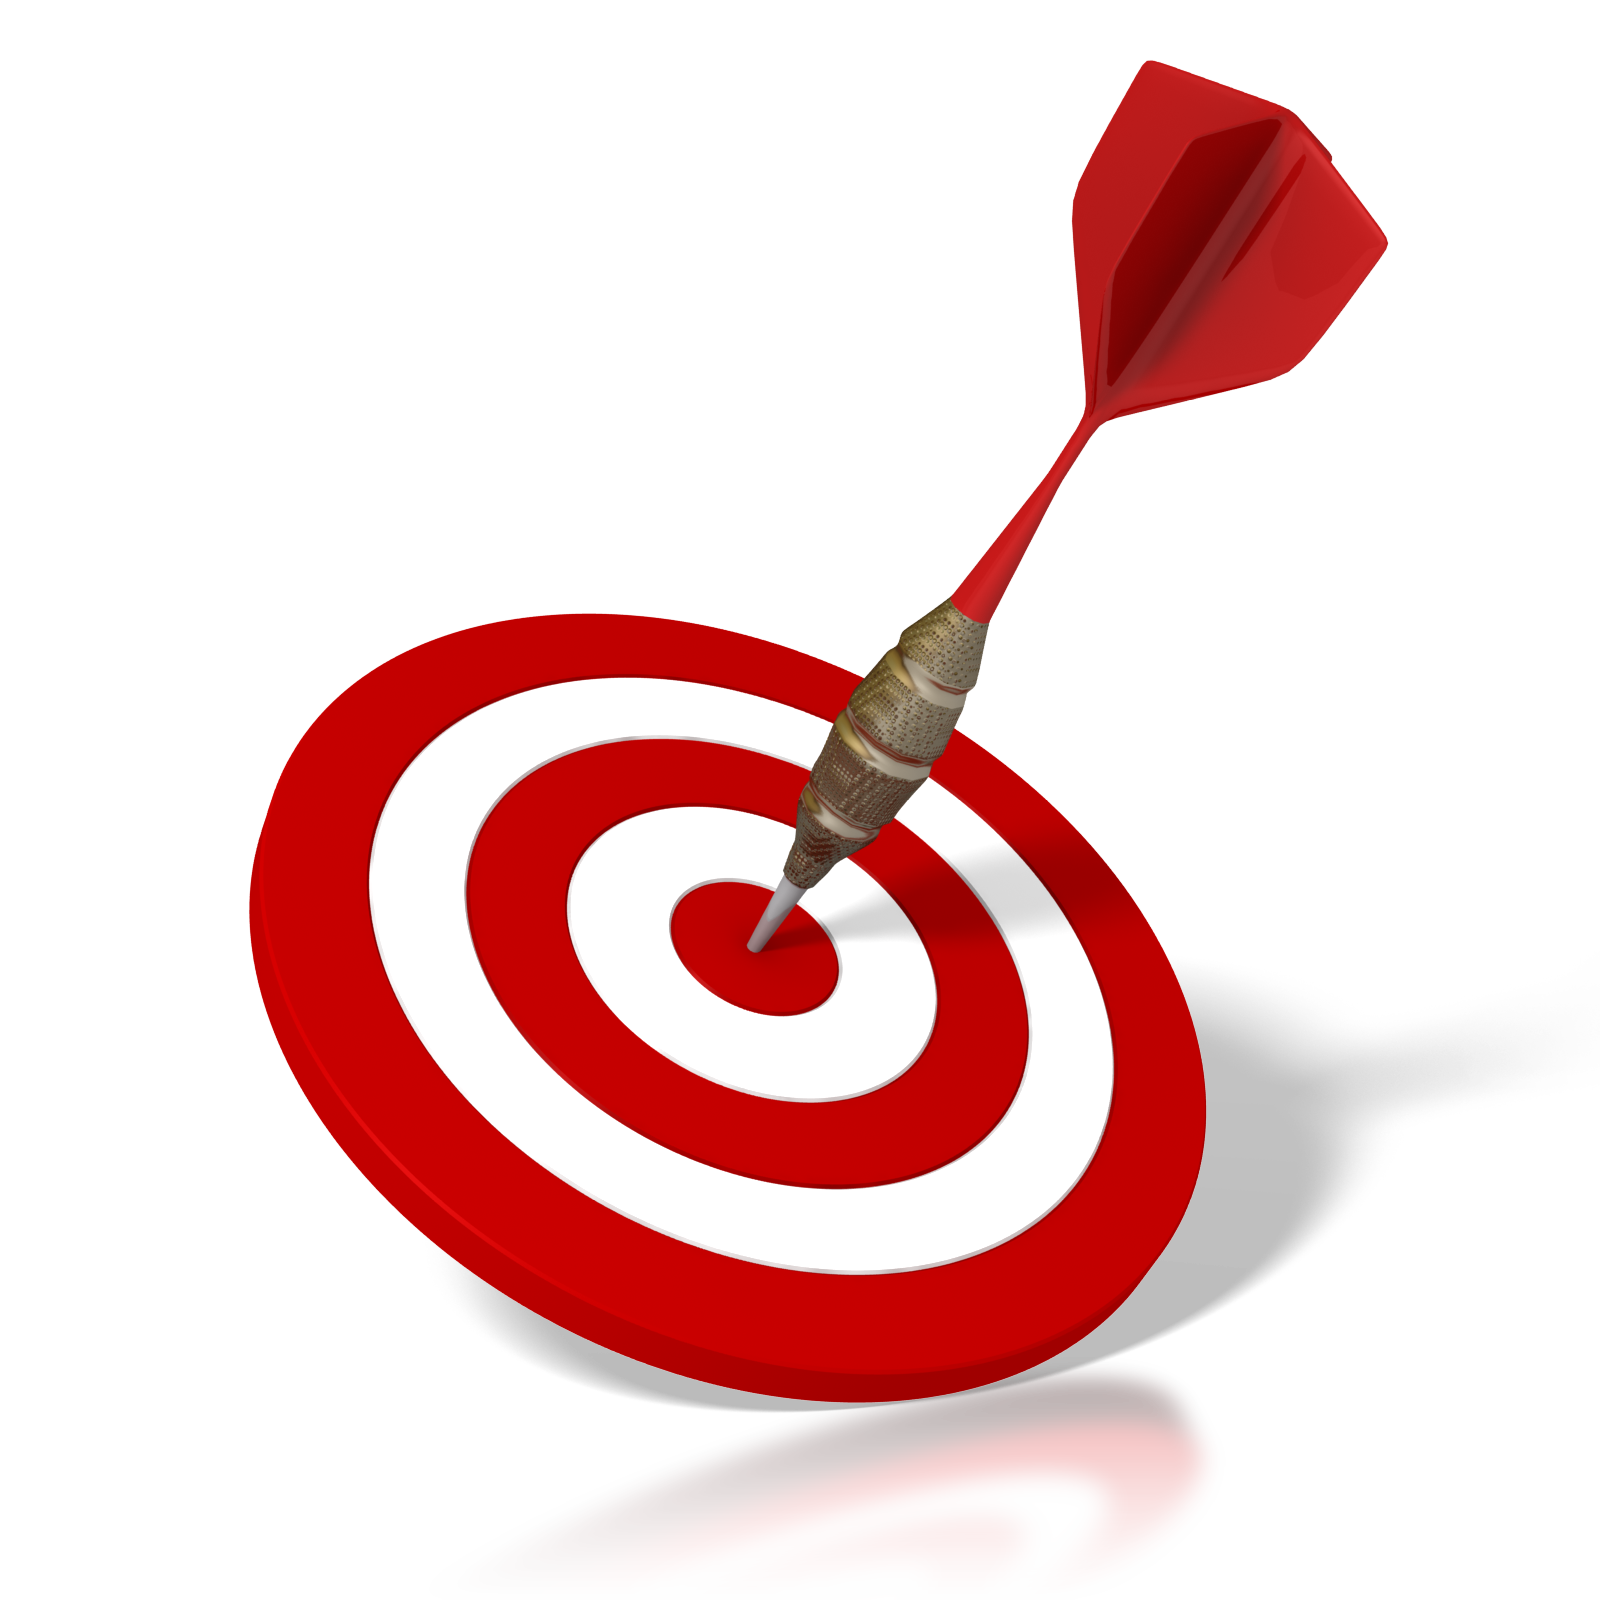 Focus clipart precise. Darts png images free